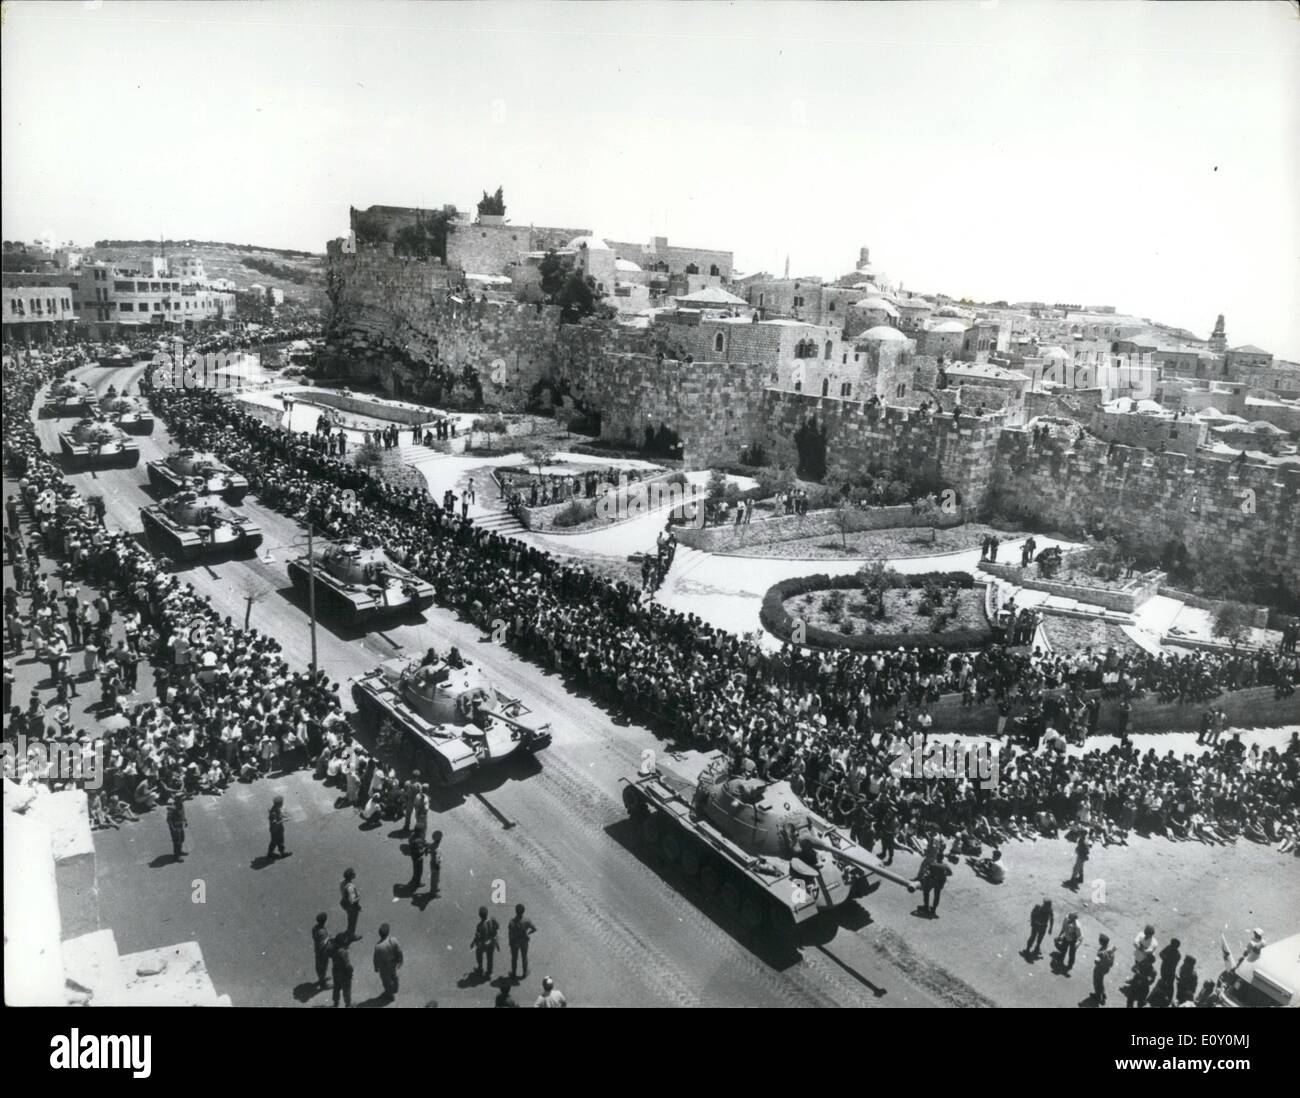 May 05, 1968 - Israel celebrates 20th anniversary of its independence with military parade: Israel celebrated its 20 year of Independence with a big military parade through the street of Jerusalem. Photo Shows A general view during the parade showing Pattom tanks taking part in the parade in the background is the Eastern side of old Jerusalem. Stock Photo